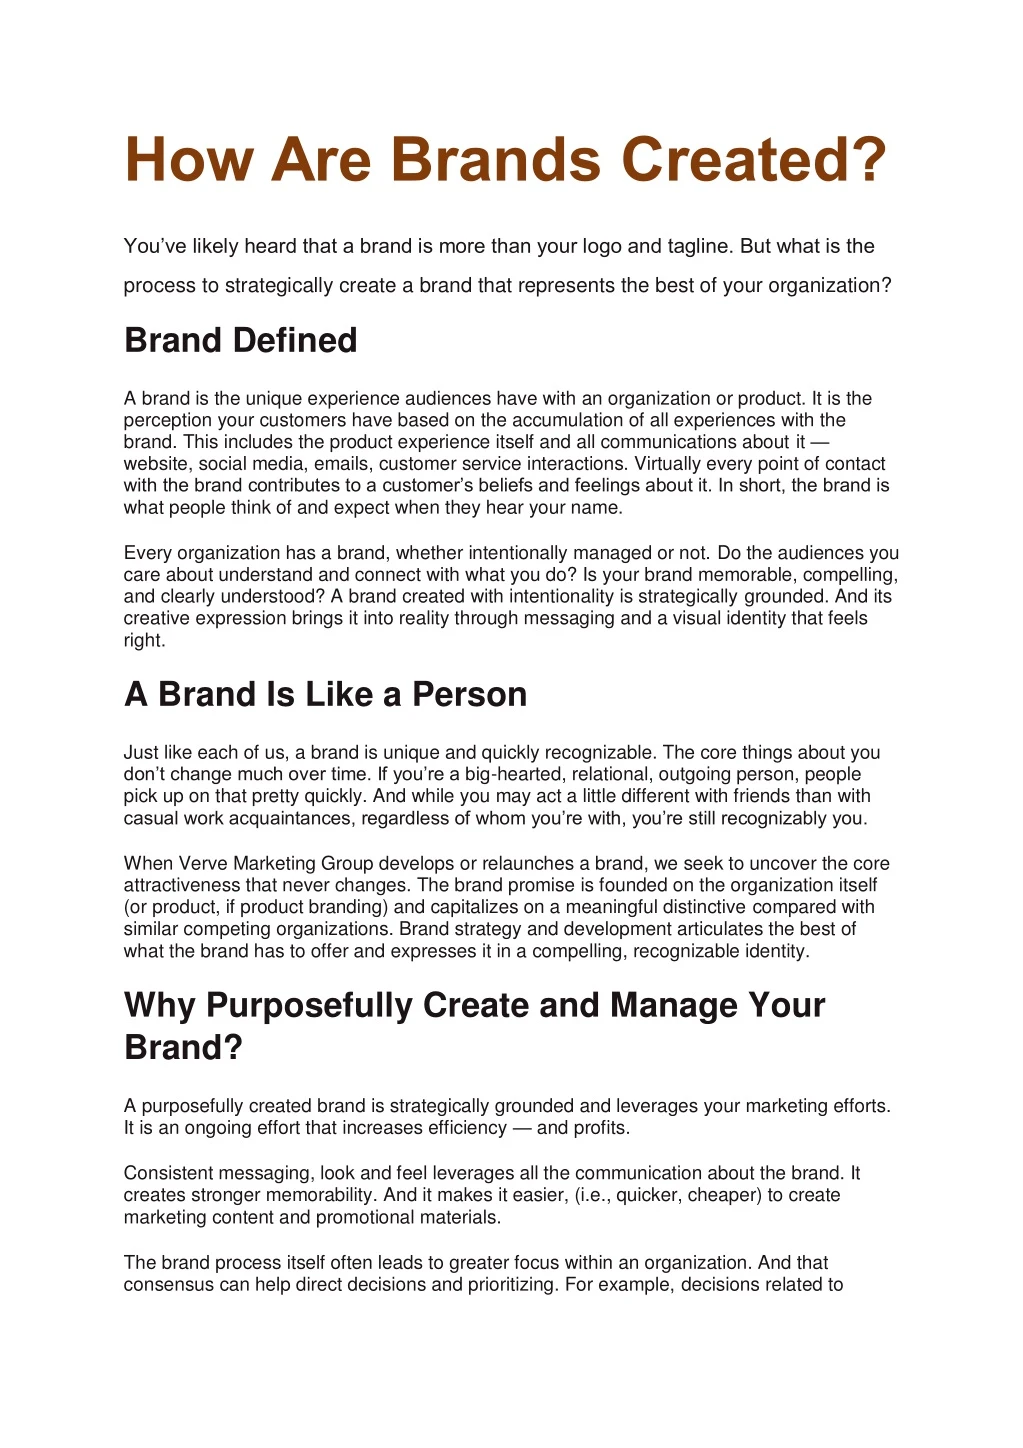 how are brands created